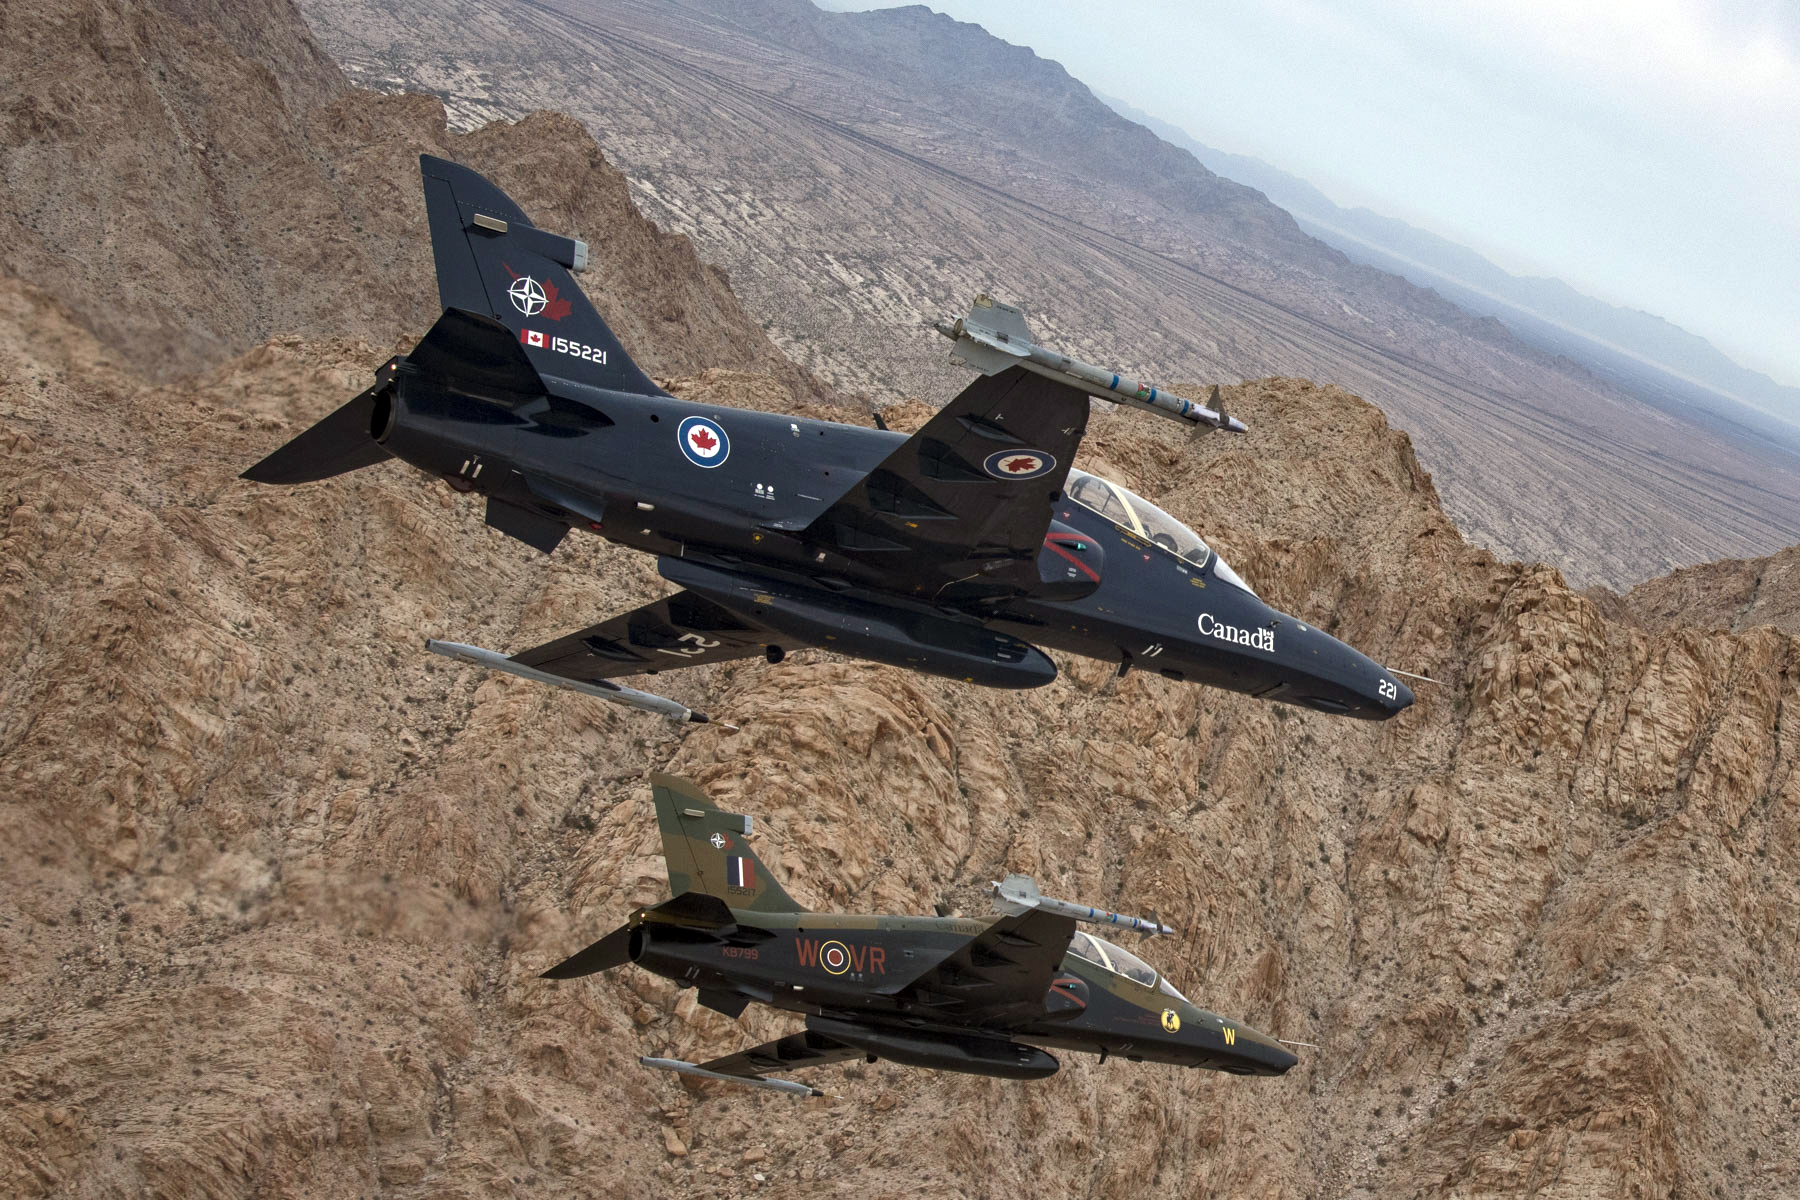 Two aircraft fly side by side over a craggy desert landscape.